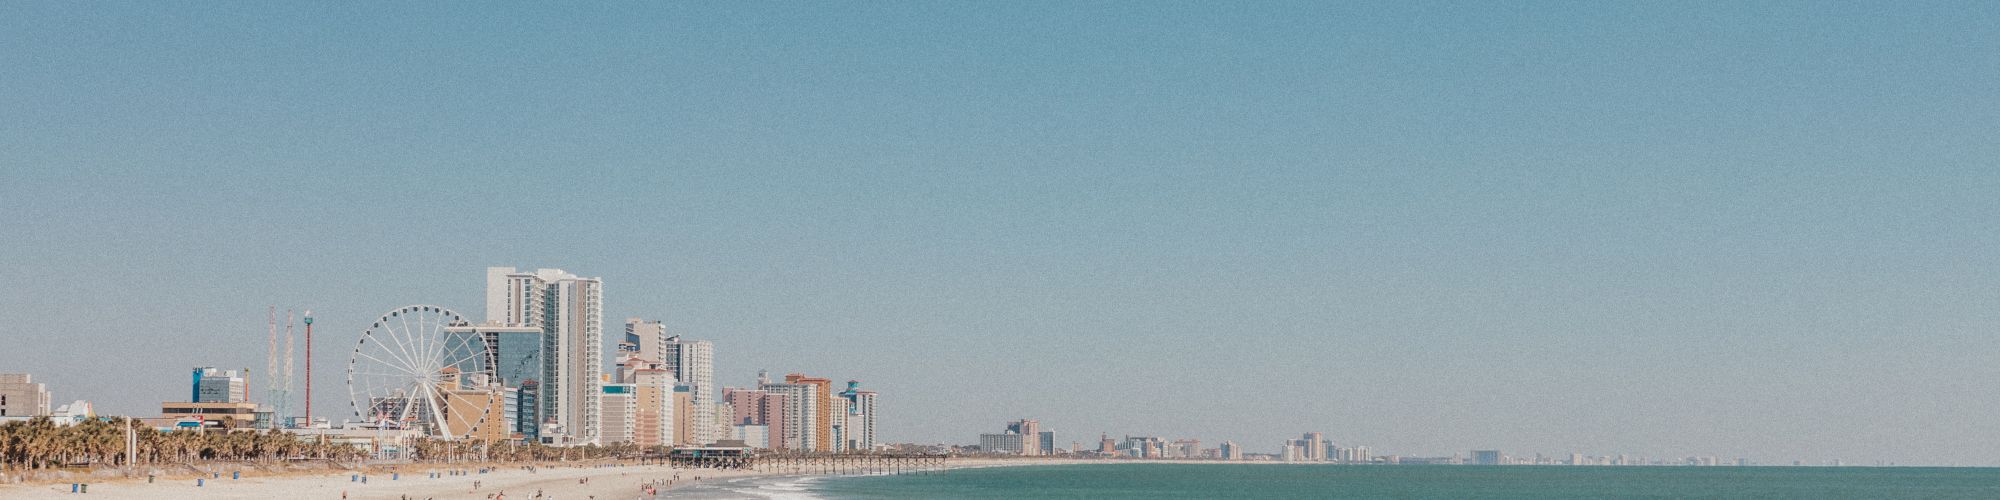 The image shows a beach with a few people walking near the shore, with a city skyline and Ferris wheel in the background.